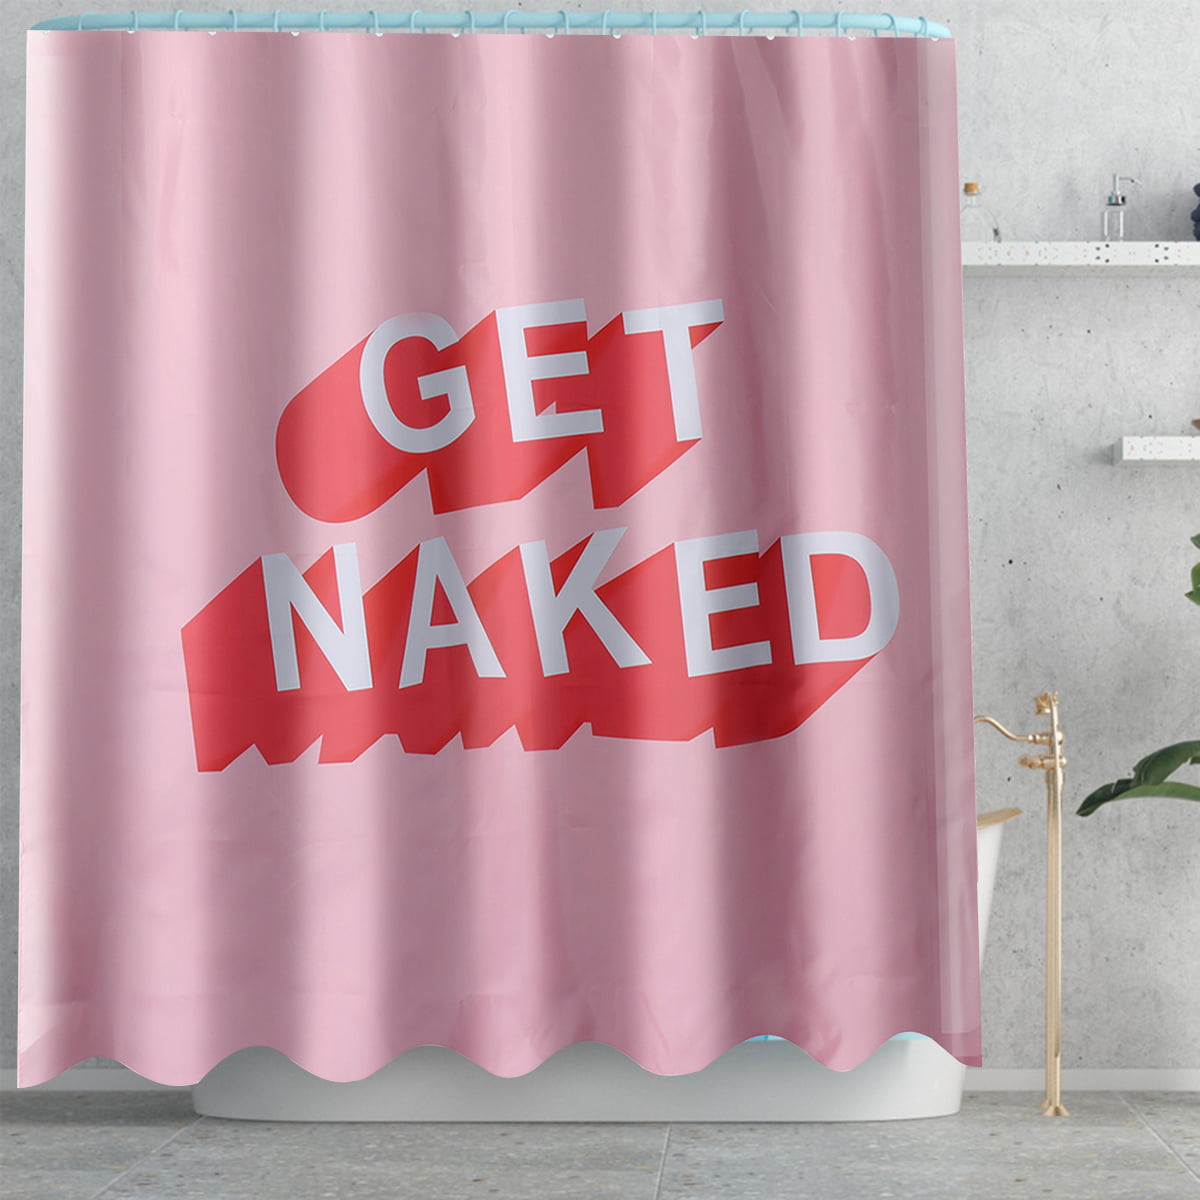 Get Naked Shower Curtain Bath Mat Toilet Cover Rug 